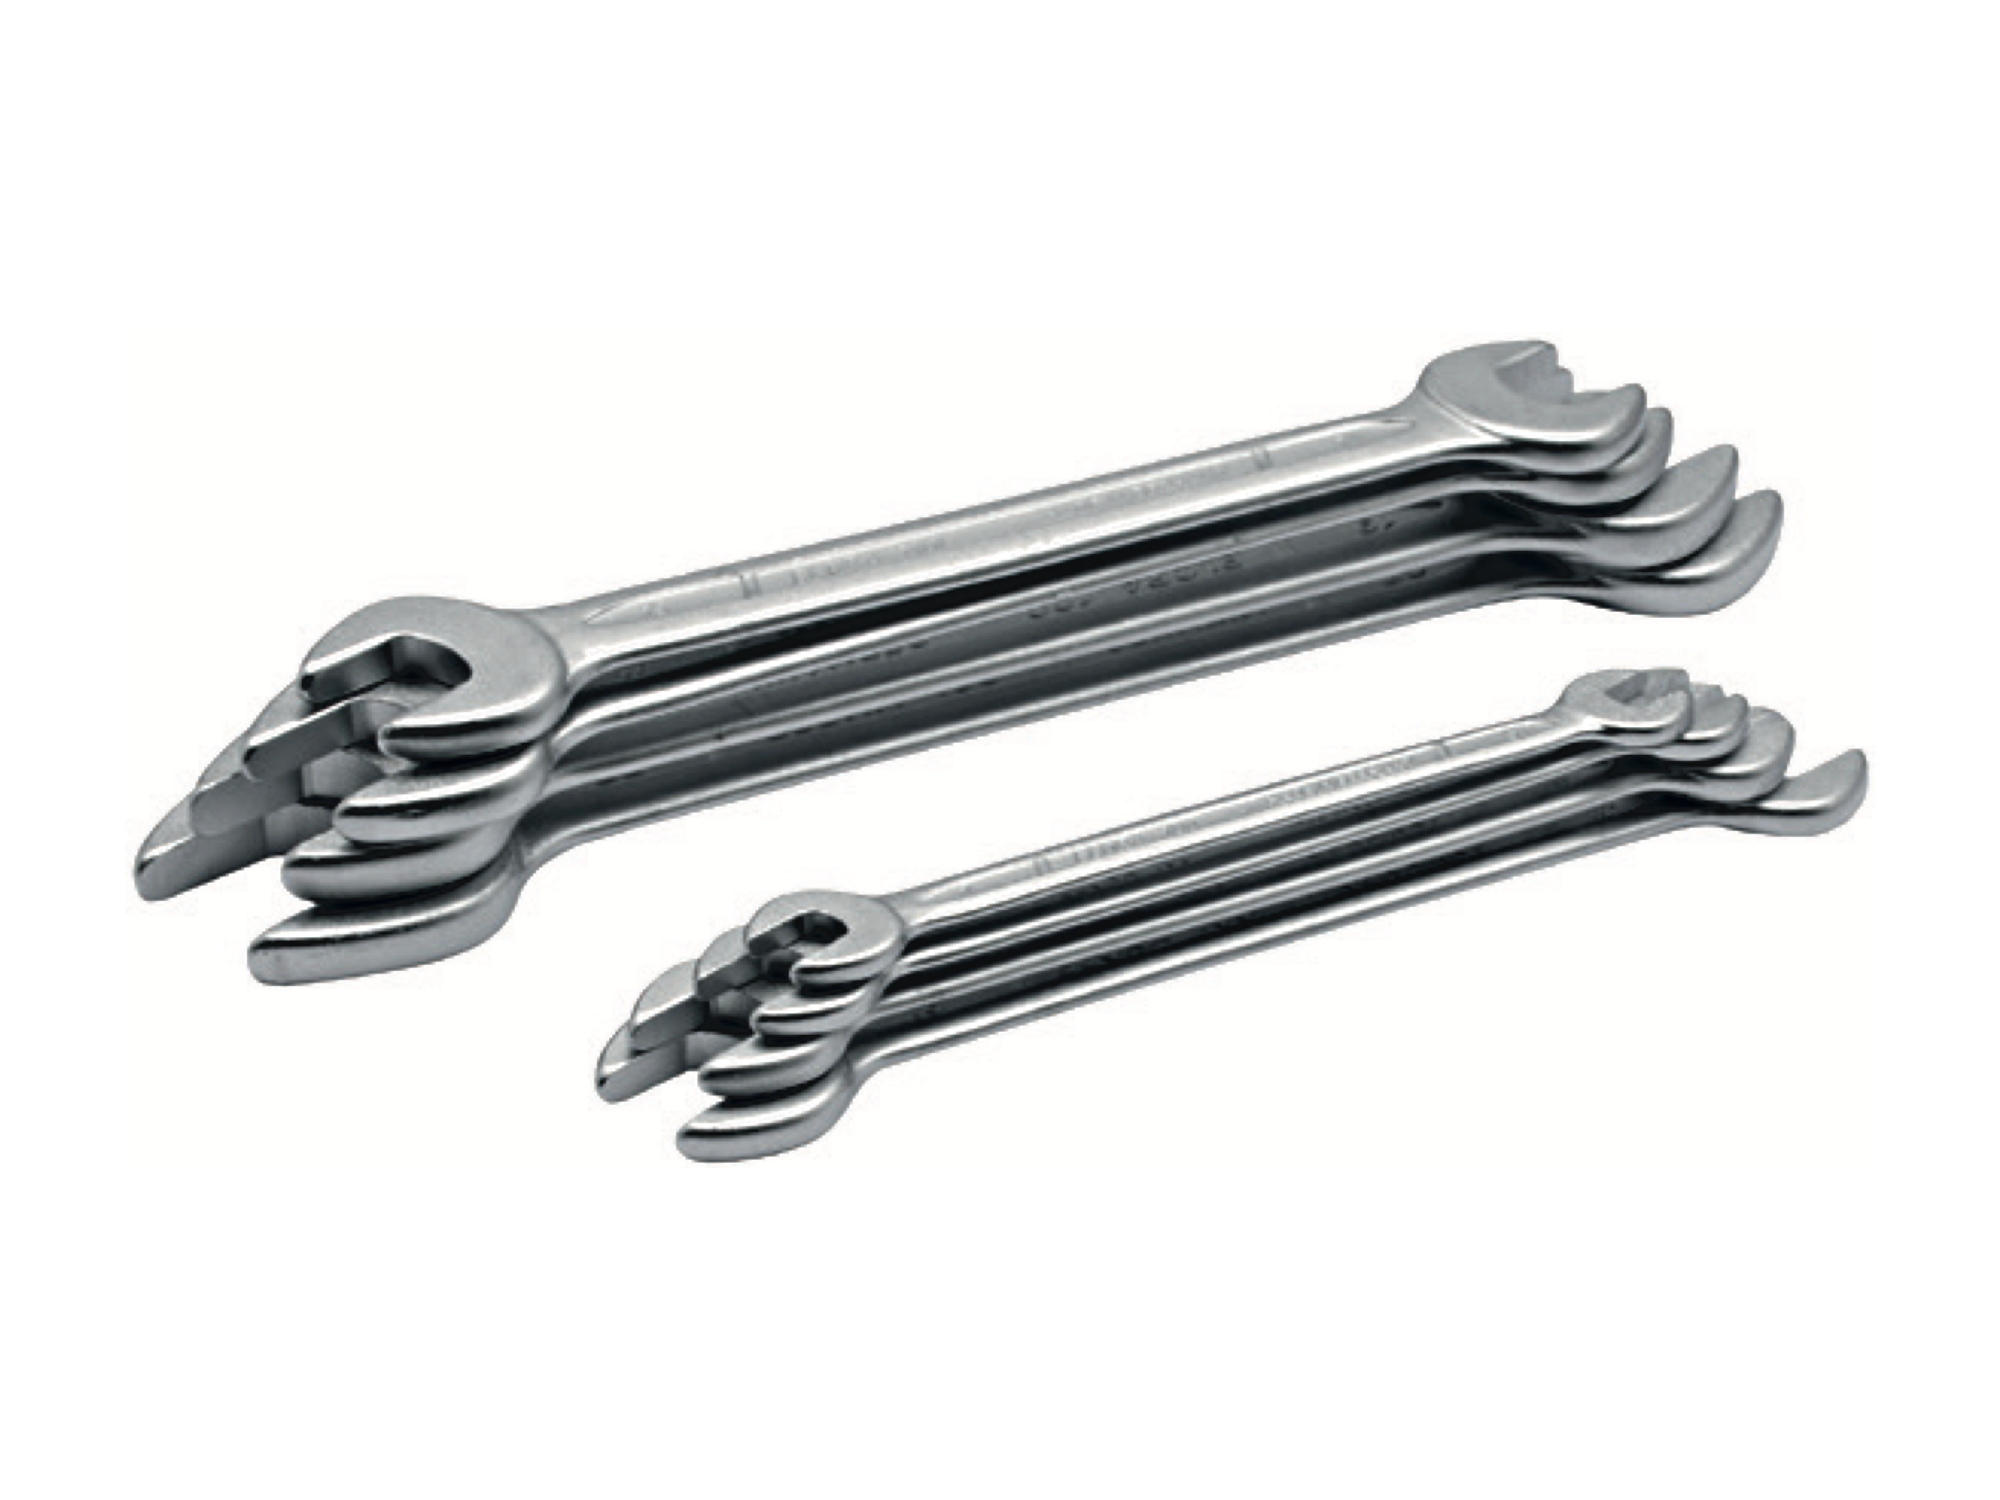 ELORA 100S-M Double Open Ended Spanner Set Metric (ELORA Tools) - Premium Double Open Ended Spanner Set from ELORA - Shop now at Yew Aik.